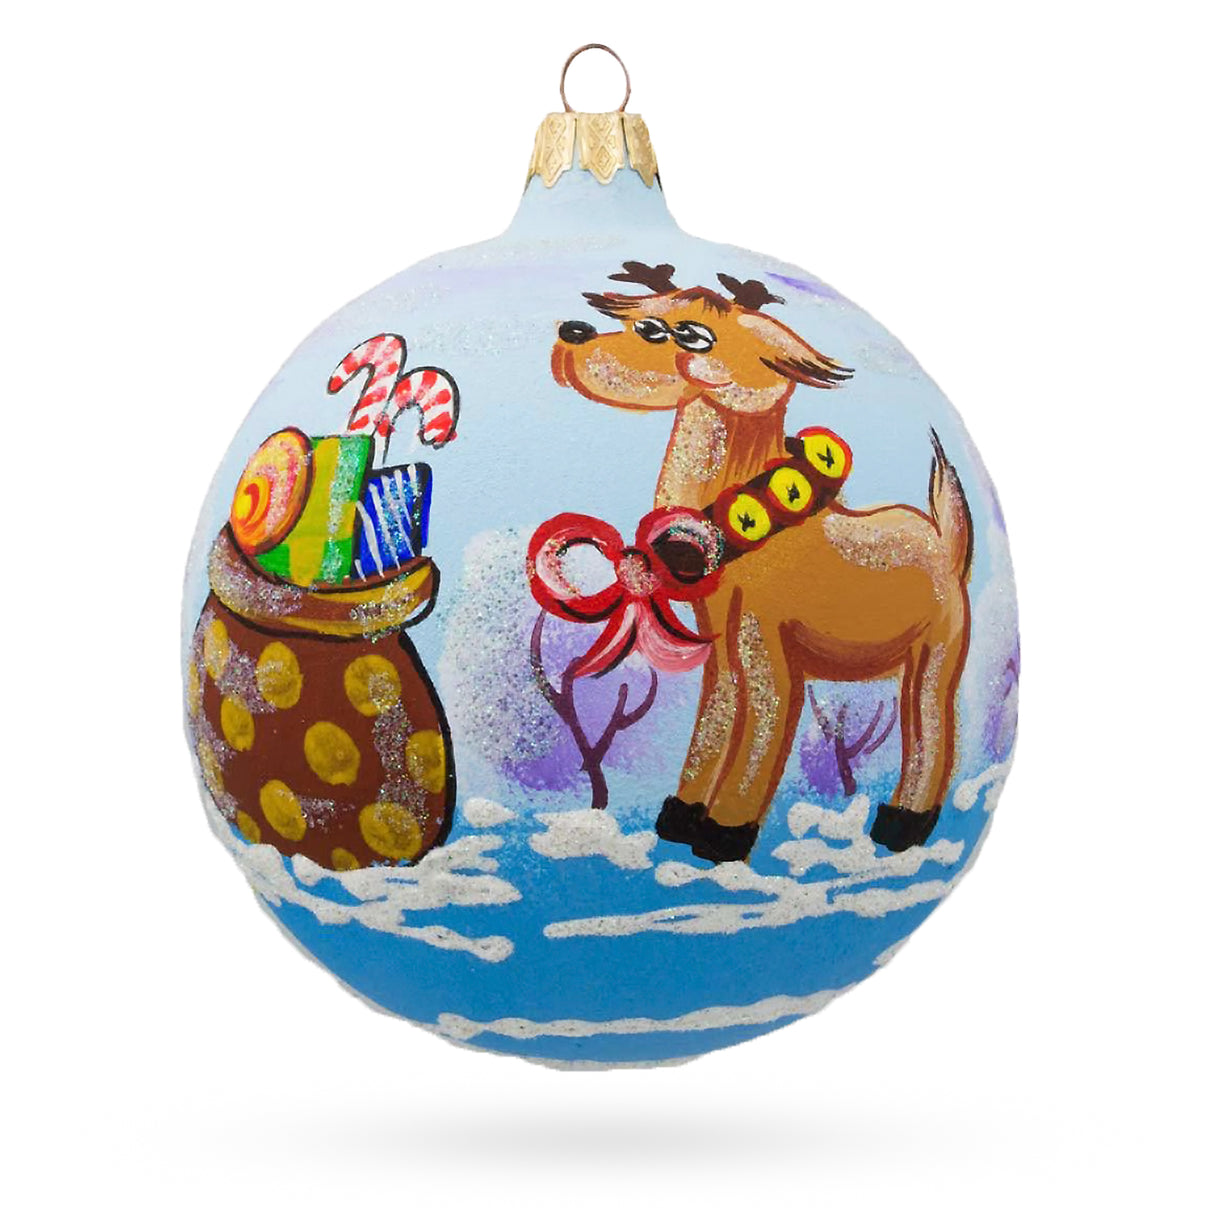 Festive Reindeer Carrying Bag of Gifts Blown Glass Ball Christmas Ornament 3.25 Inches in Multi color, Round shape